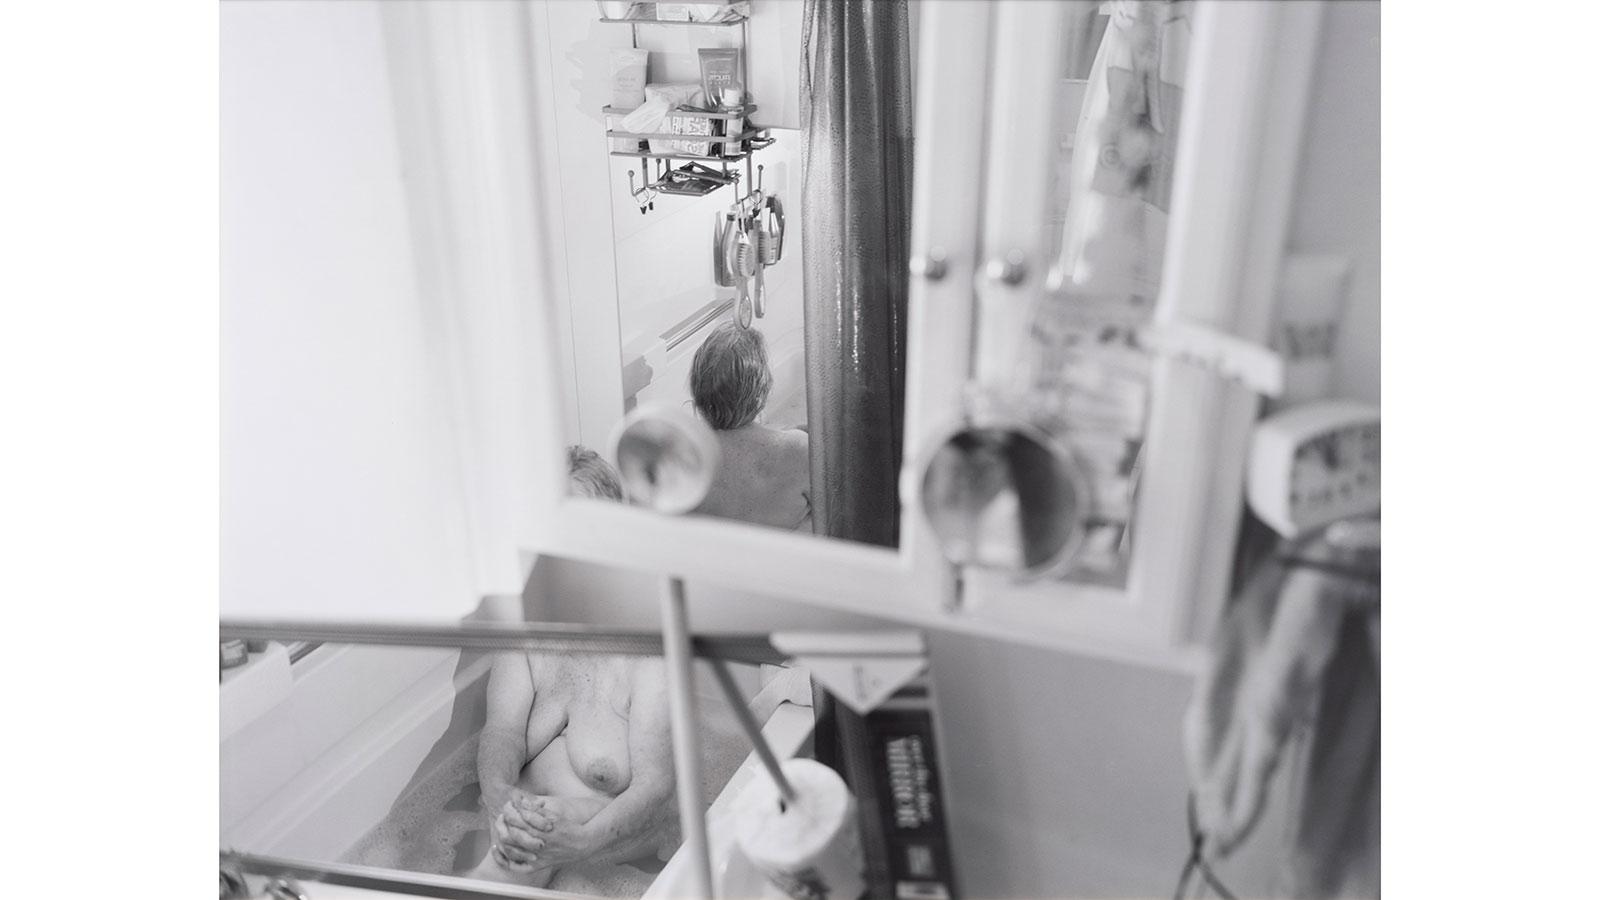 Image of an elderly lady in a bathtub called "one fifty one (syzygy)" by Katherine Hubbard displayed in the We're Home exhibition in the Pace University Art Gallery.